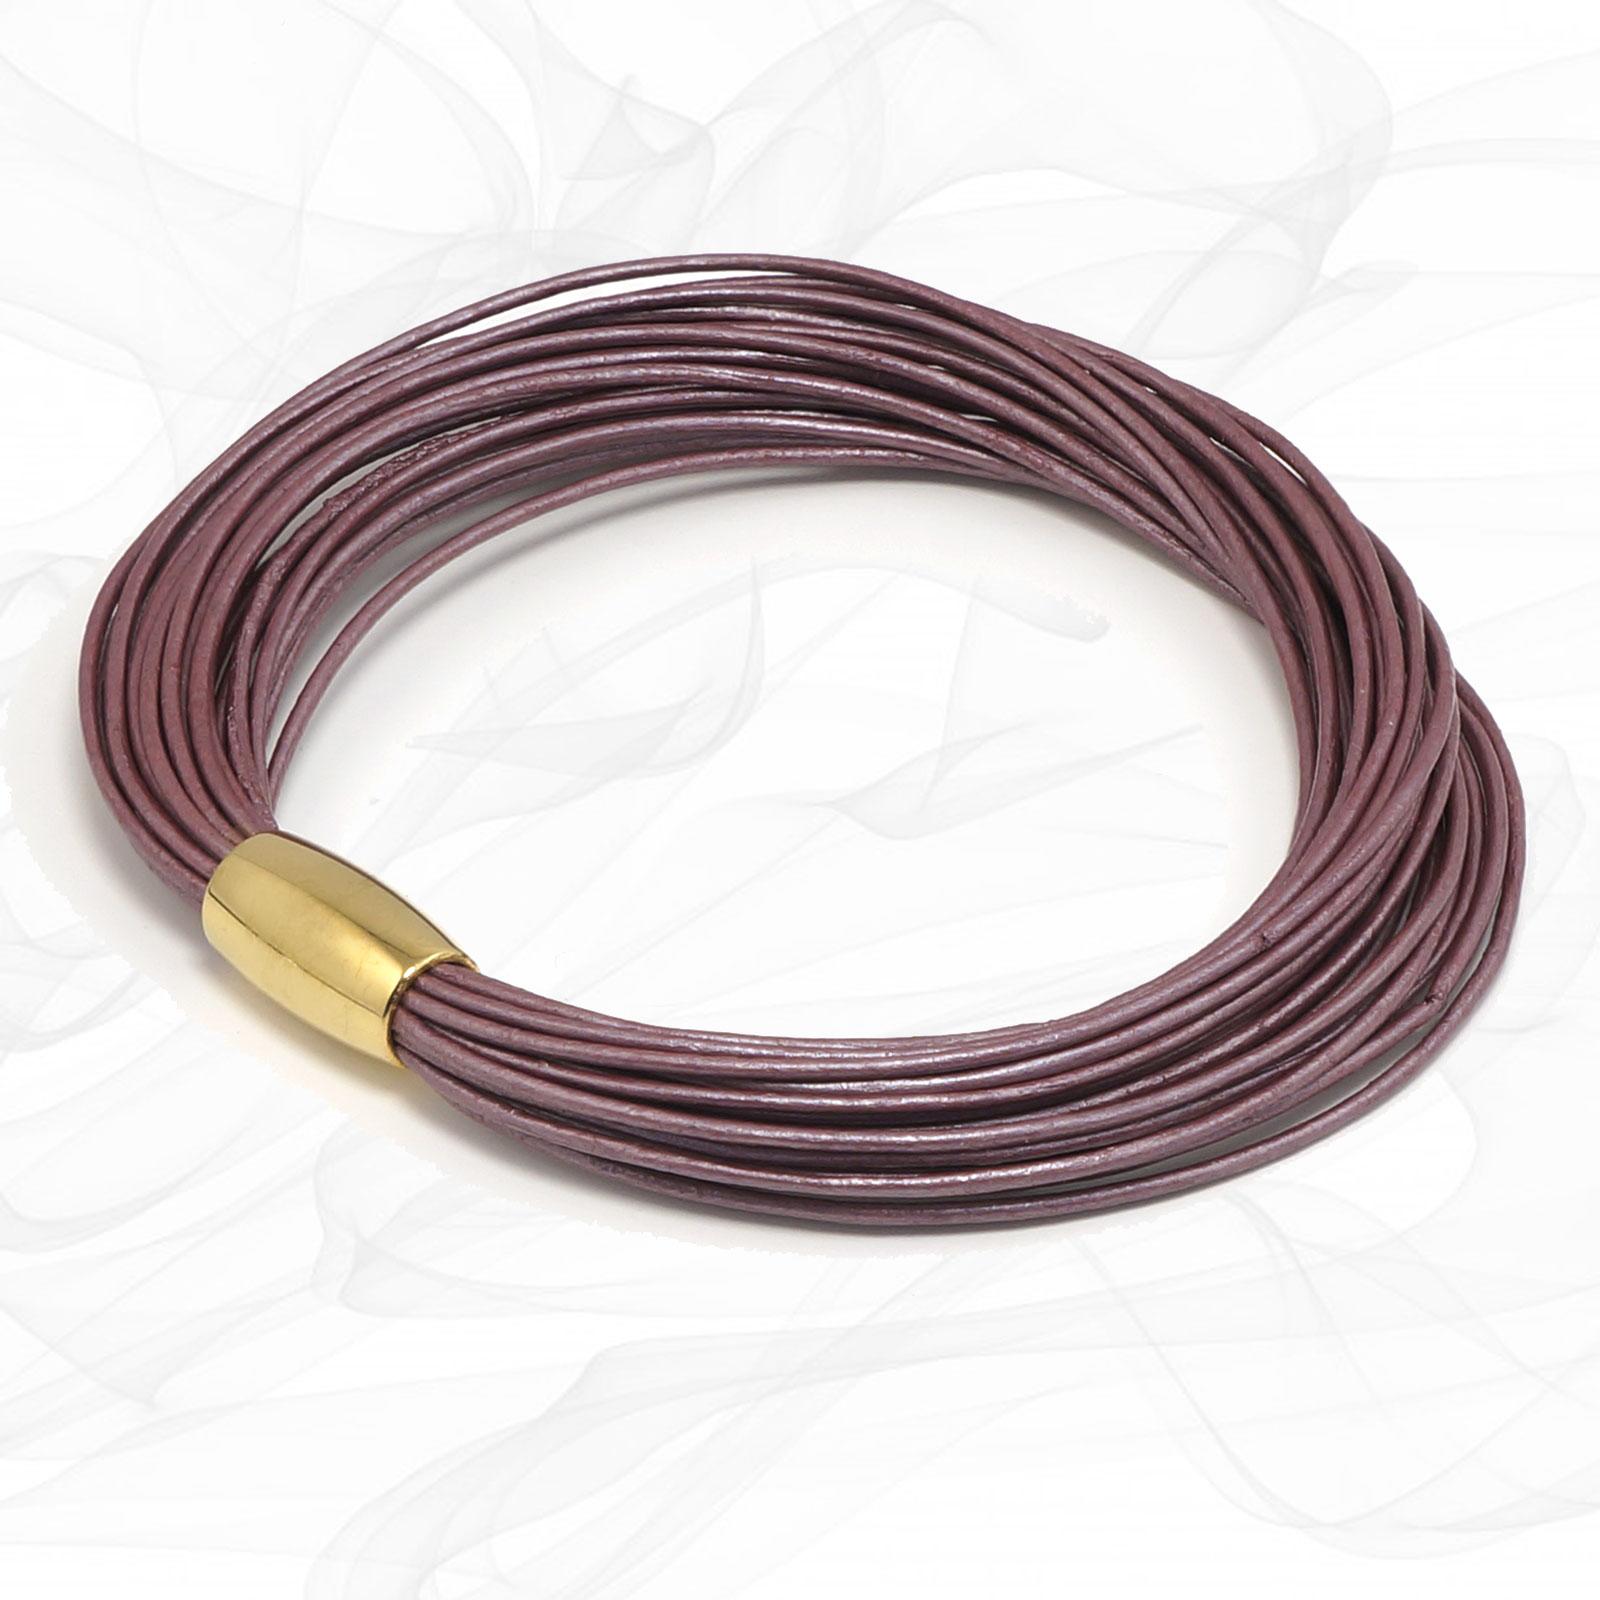 Purple Multi Strand Leather Bracelet for Women, one size, Limited Edition. With strong Magnetic Clasp.